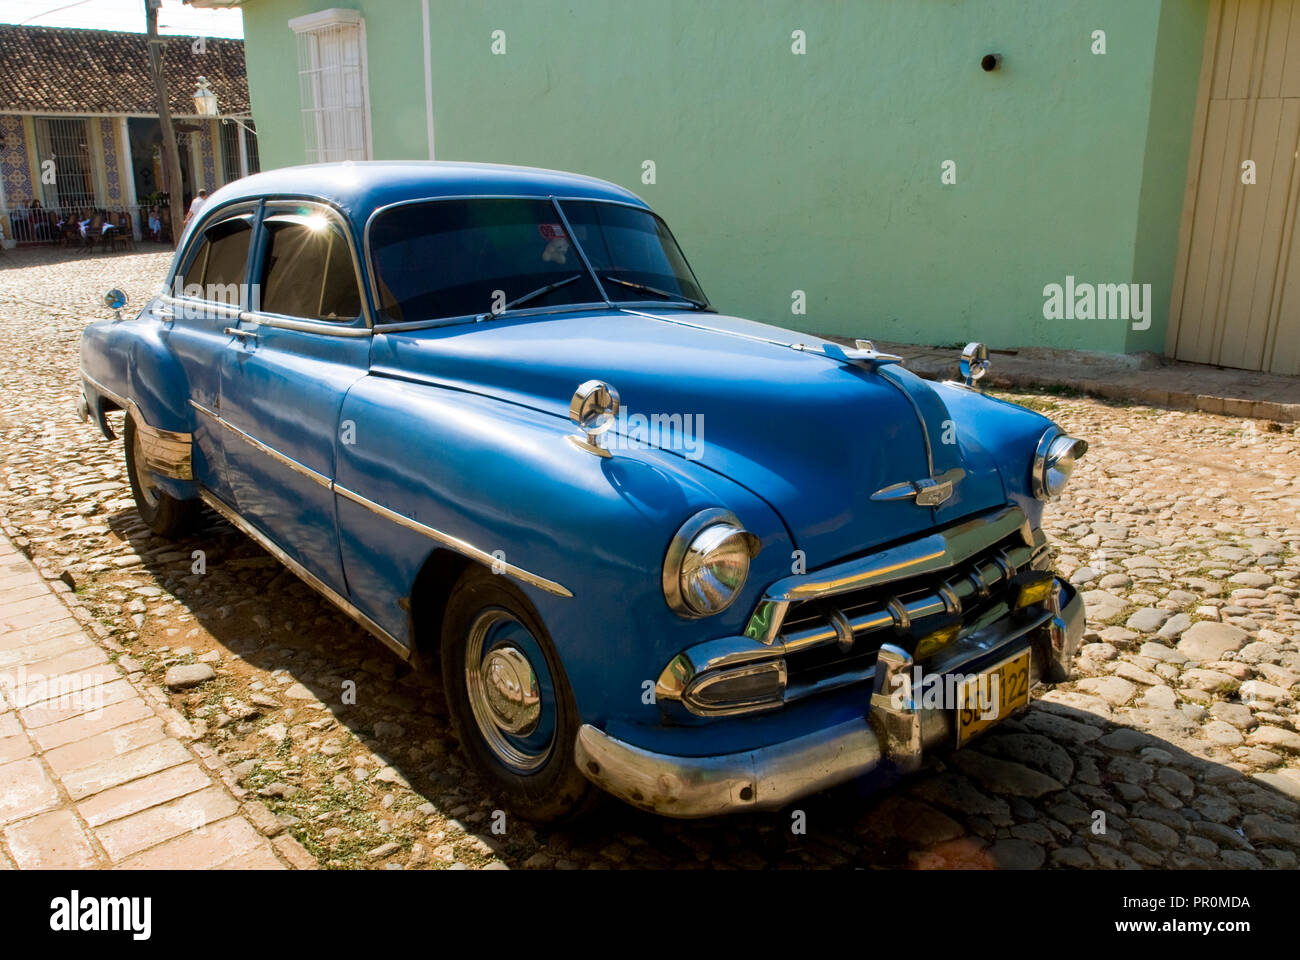 Blue Vintage American Car In The Street Of Trinidad Cuba West Indies Stock Photo